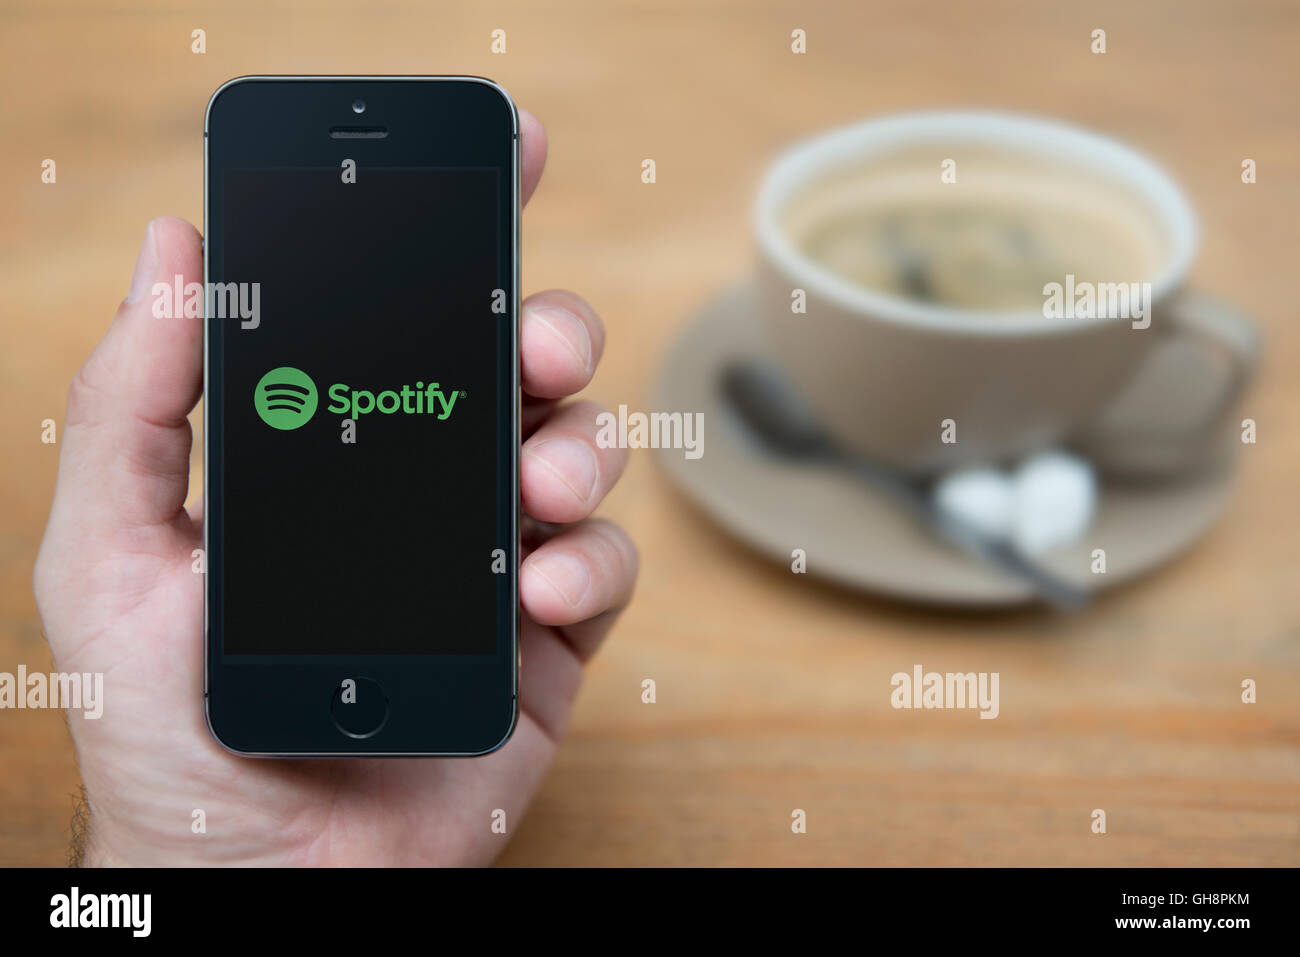 A man looks at his iPhone which displays the Spotify logo, while sat with a cup of coffee (Editorial use only). Stock Photo